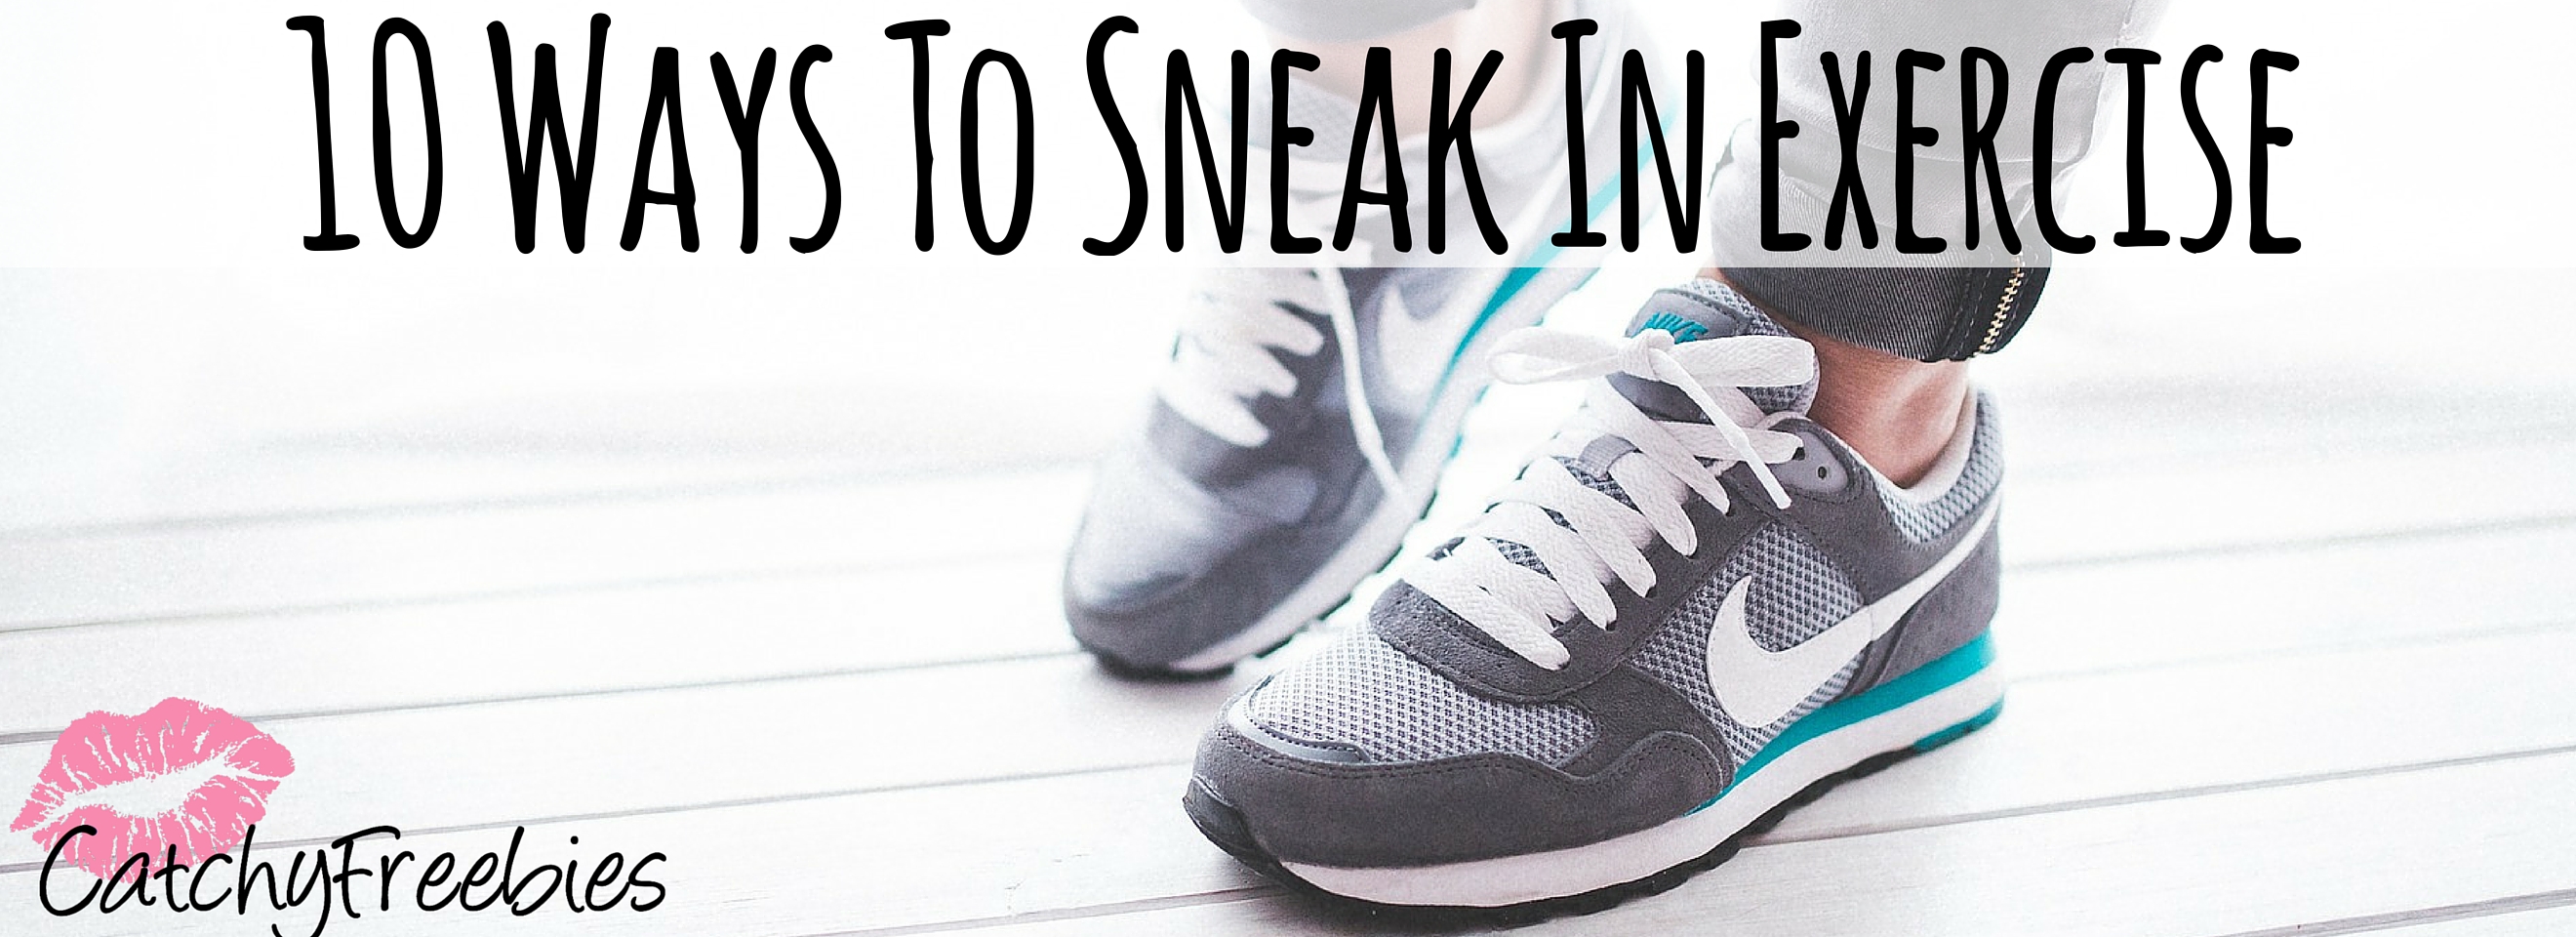 10 Ways To Sneak In Exercise -CatchyFreebies